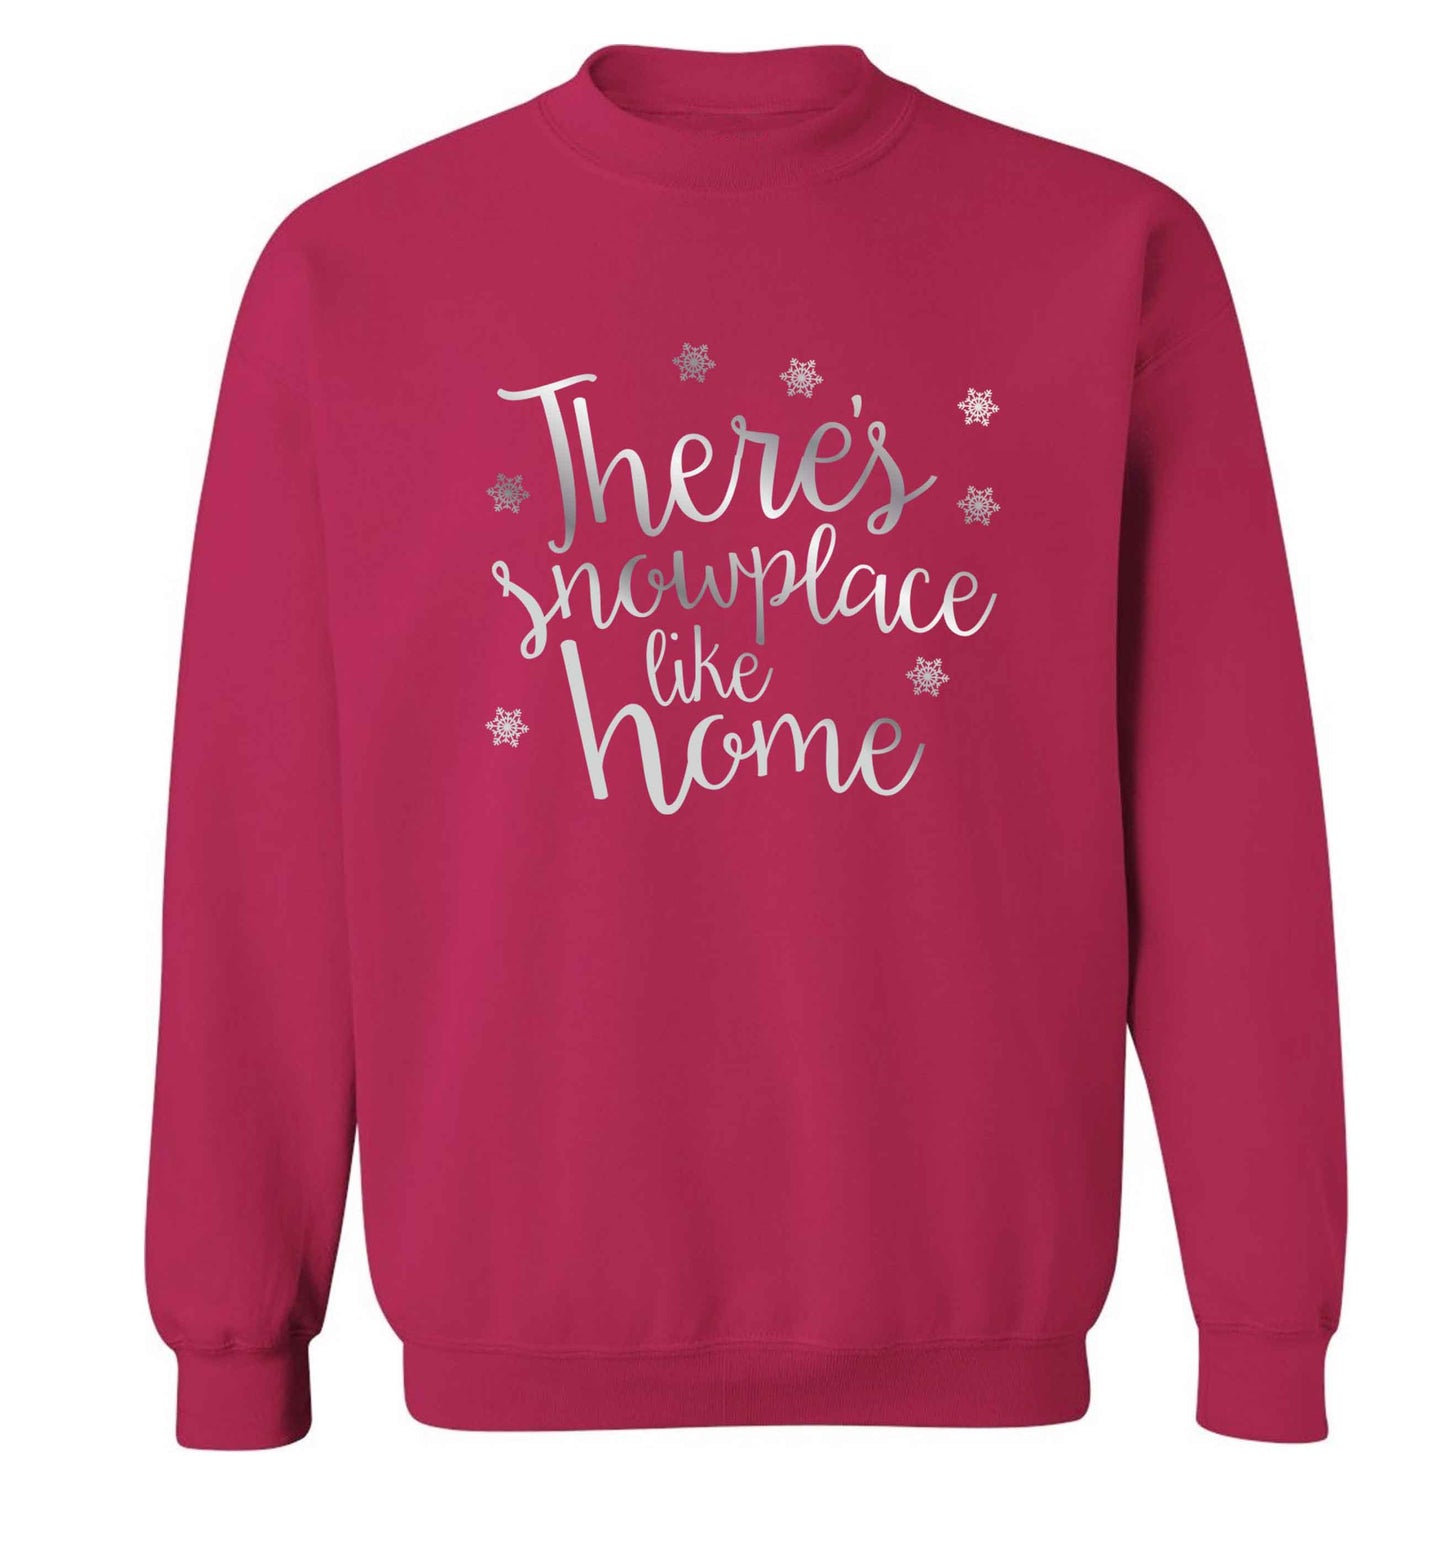 There's snowplace like home - metallic silver adult's unisex pink sweater 2XL